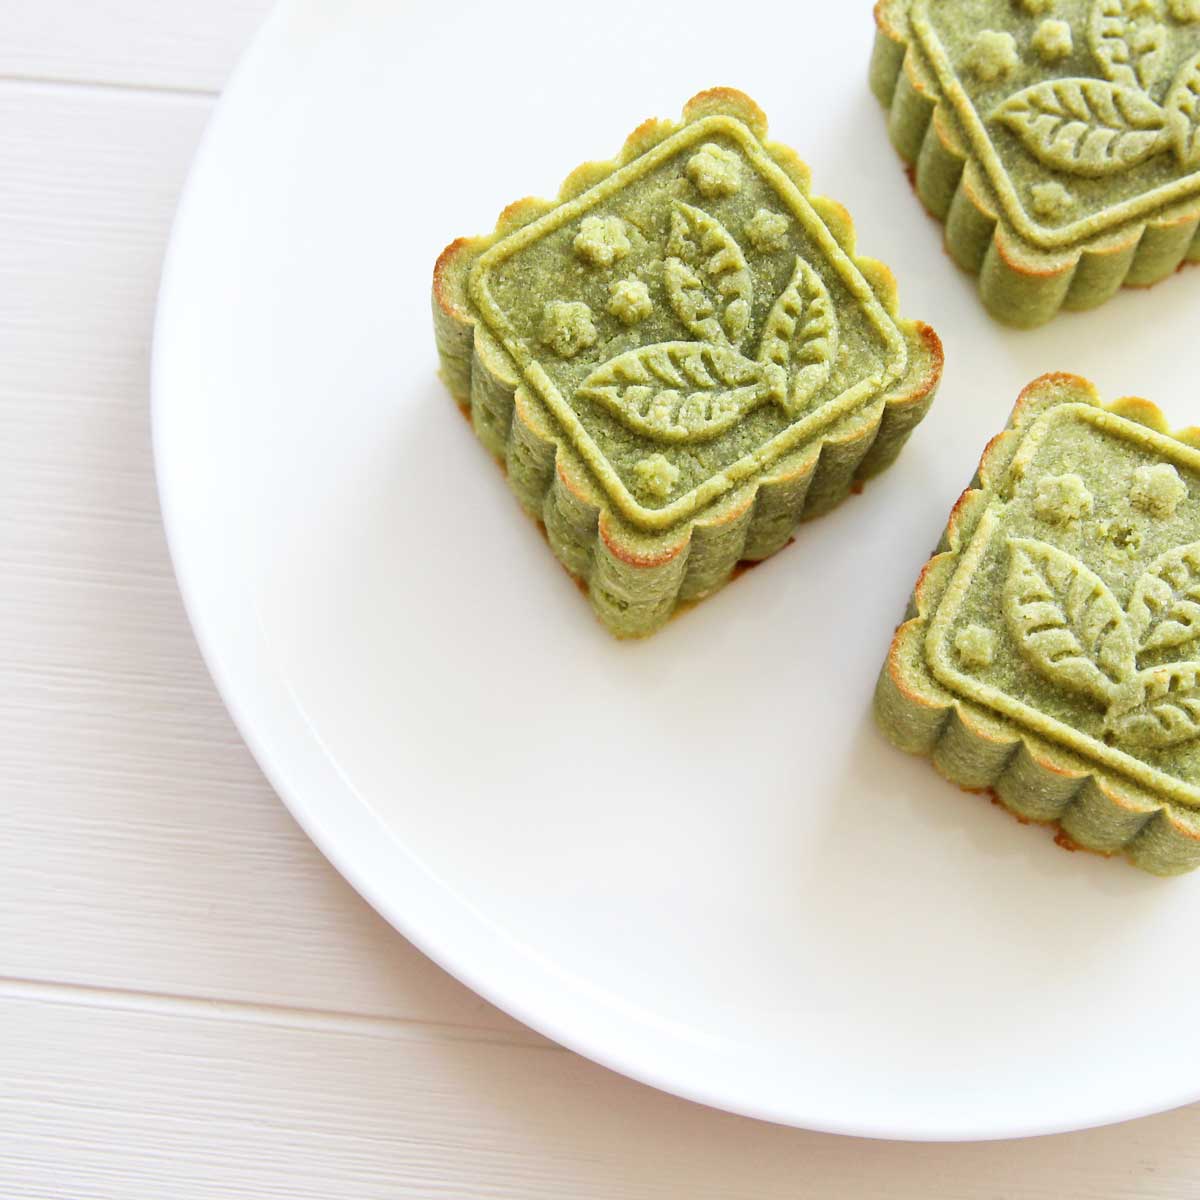 Baked Almond Flour Mooncakes with Easy Cheesecake Filling - almond flour mooncakes